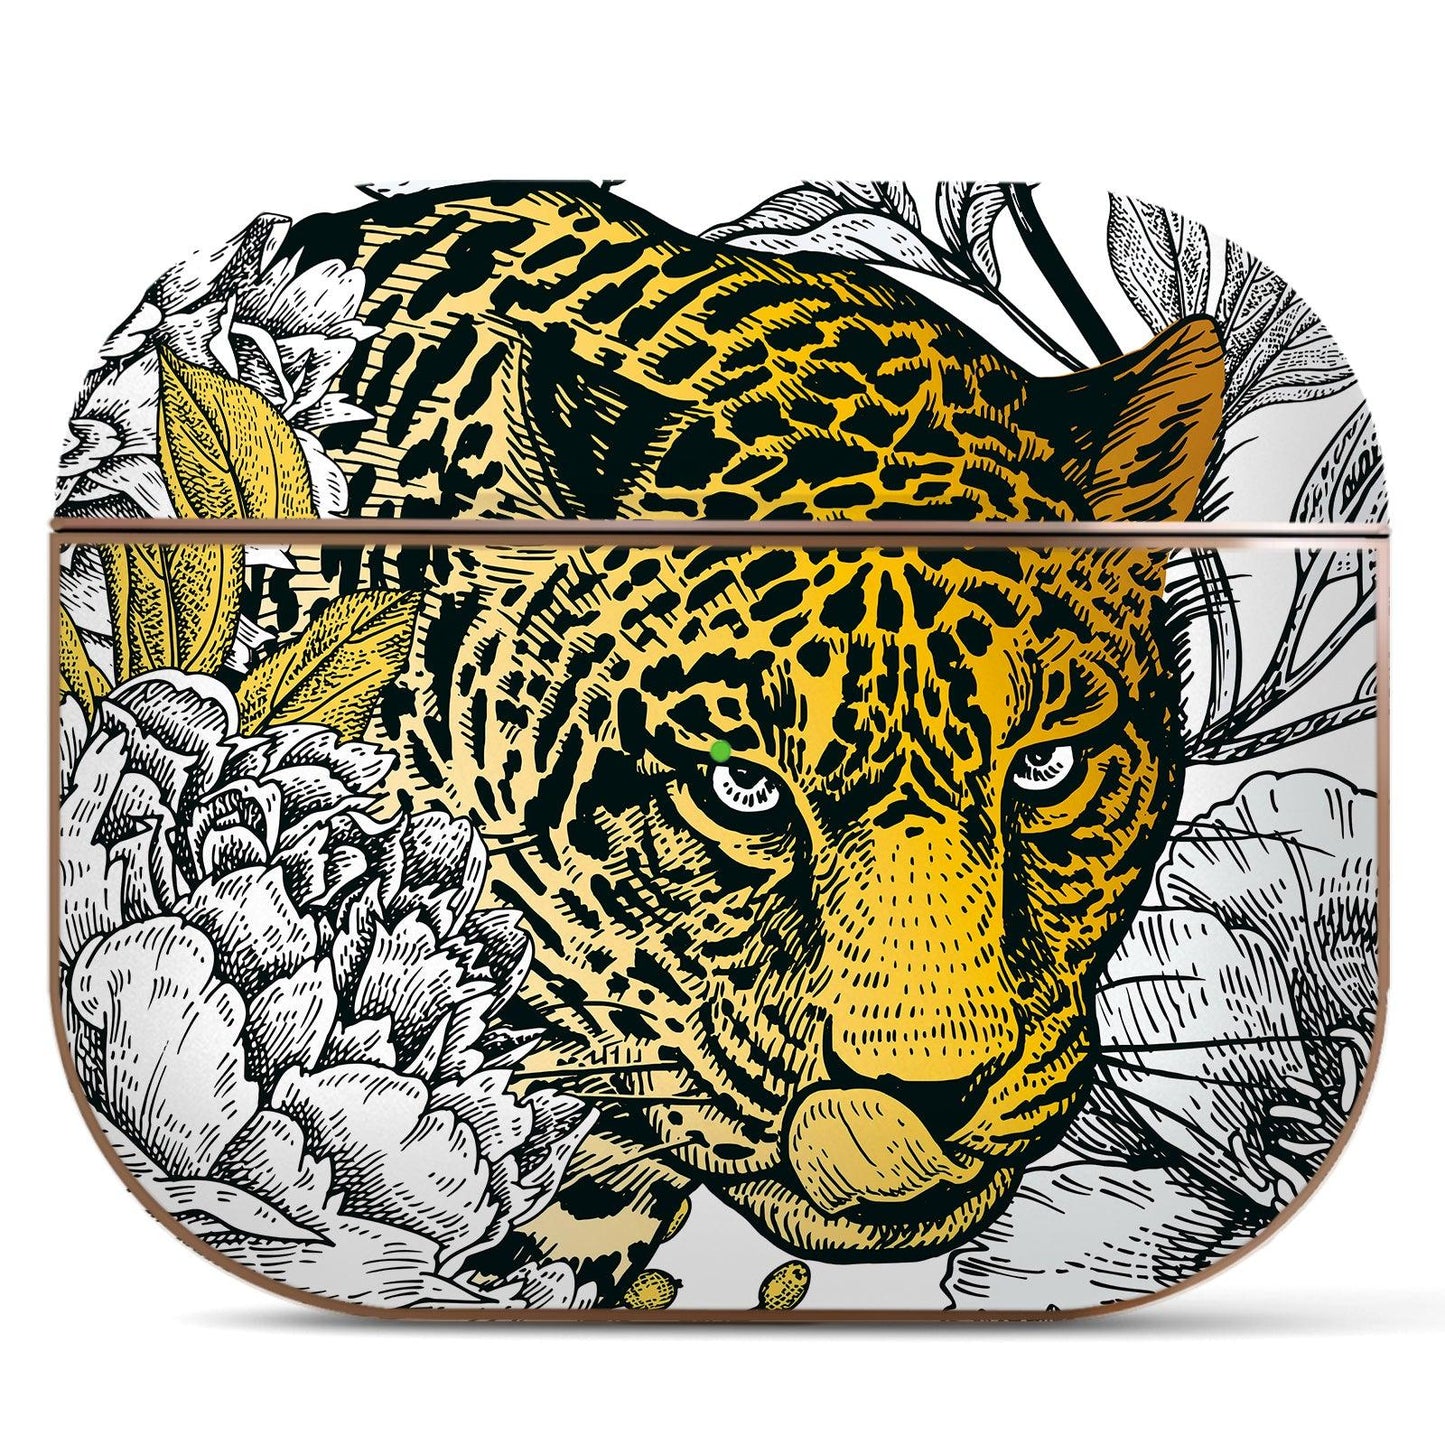 AirPods 3rd Generation Contemporary Cover, Leopard and Peonies - Berkin Arts